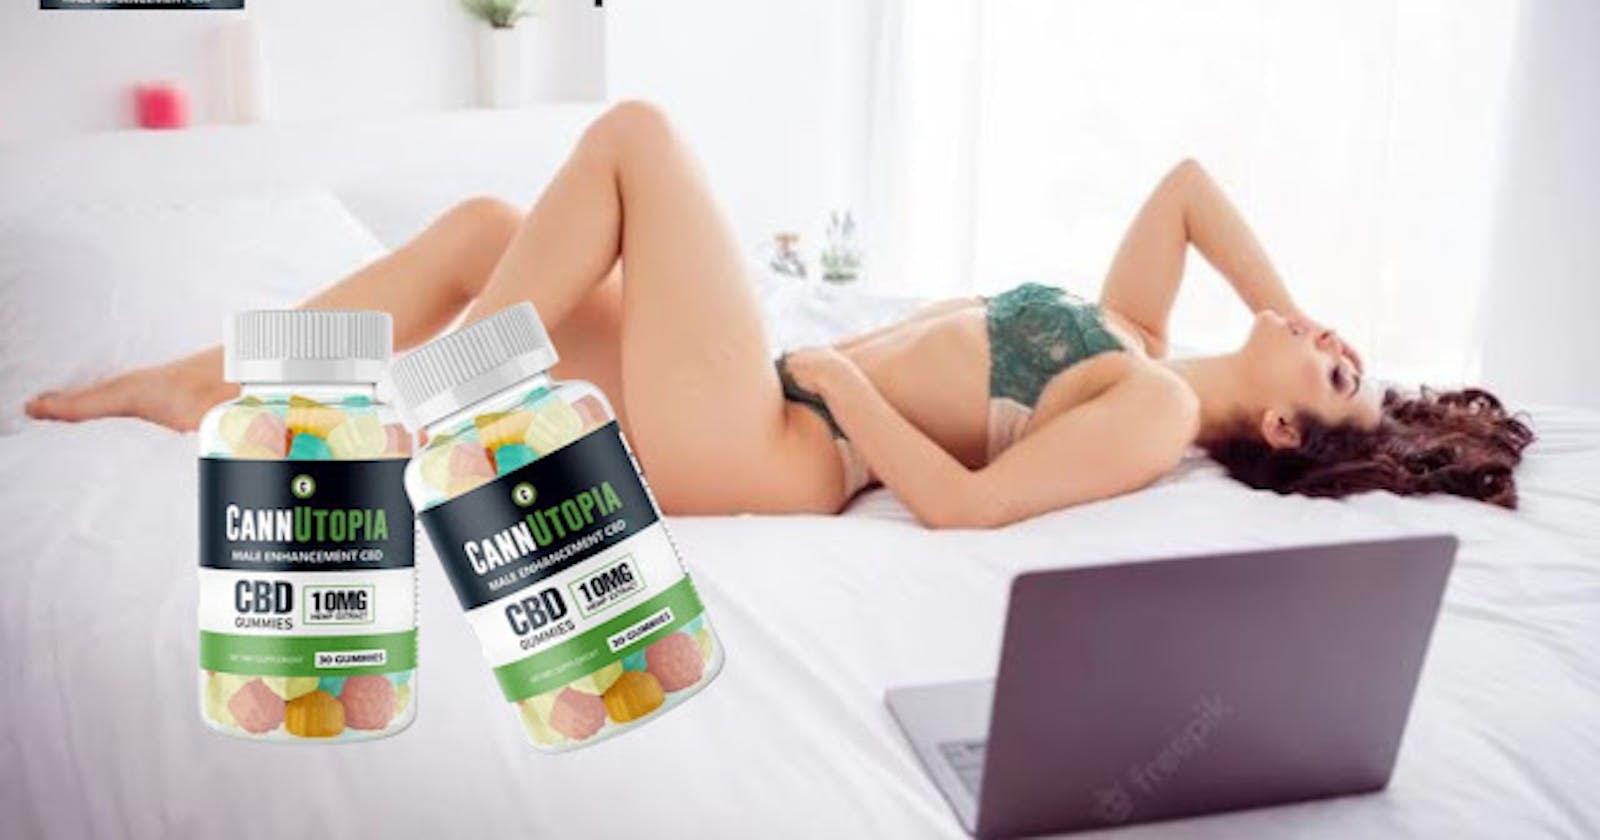 CannUtopia Male Enhancement Gummies [Fake Exposed] Reviews: Is It Safe Or Scam Trusted?